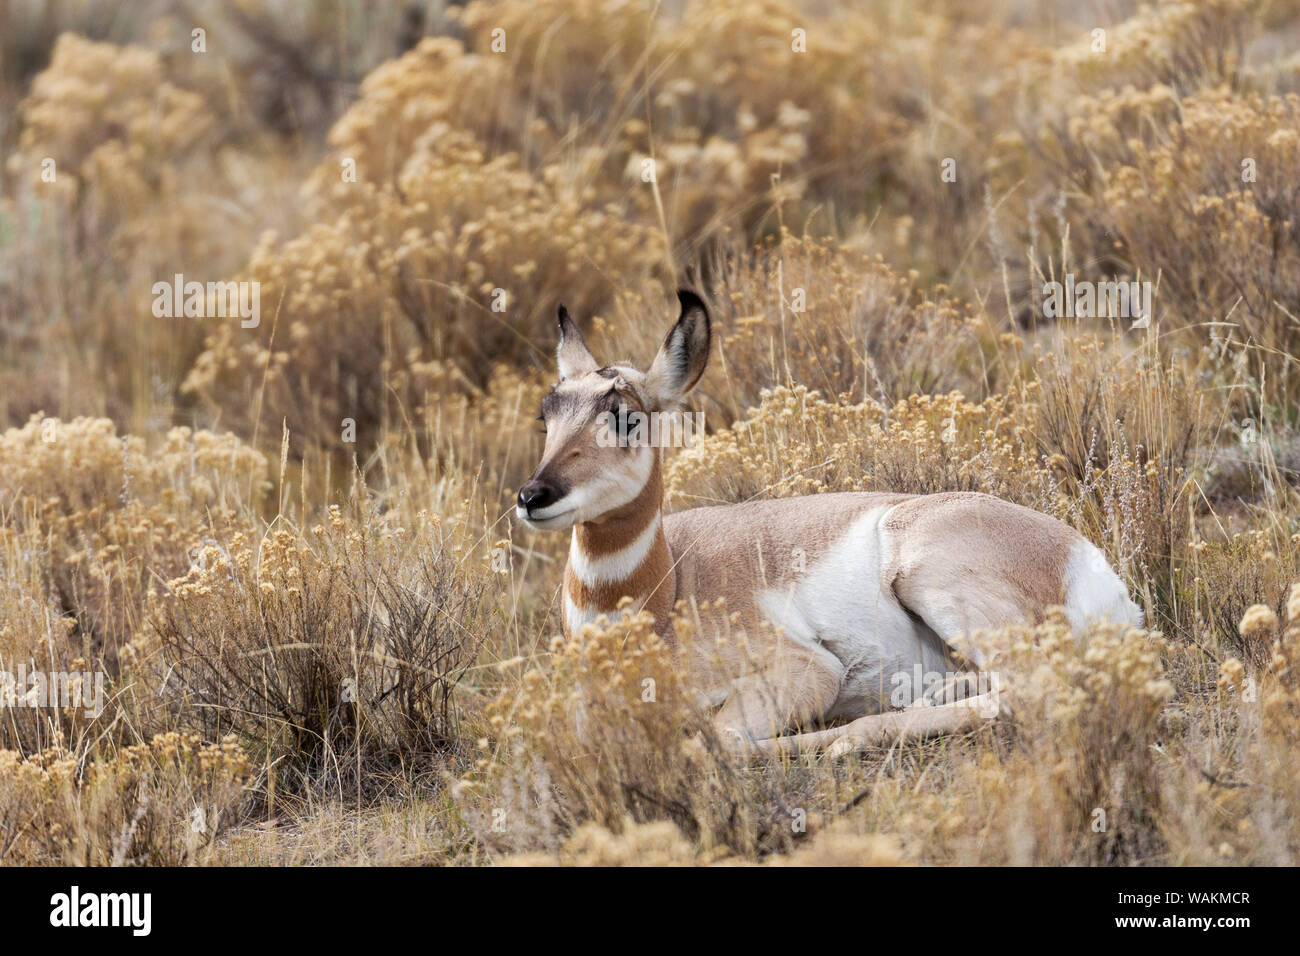 Usa, Wyoming, Yellowstone National Park. Young pronghorn resting in sagebrush. Stock Photo